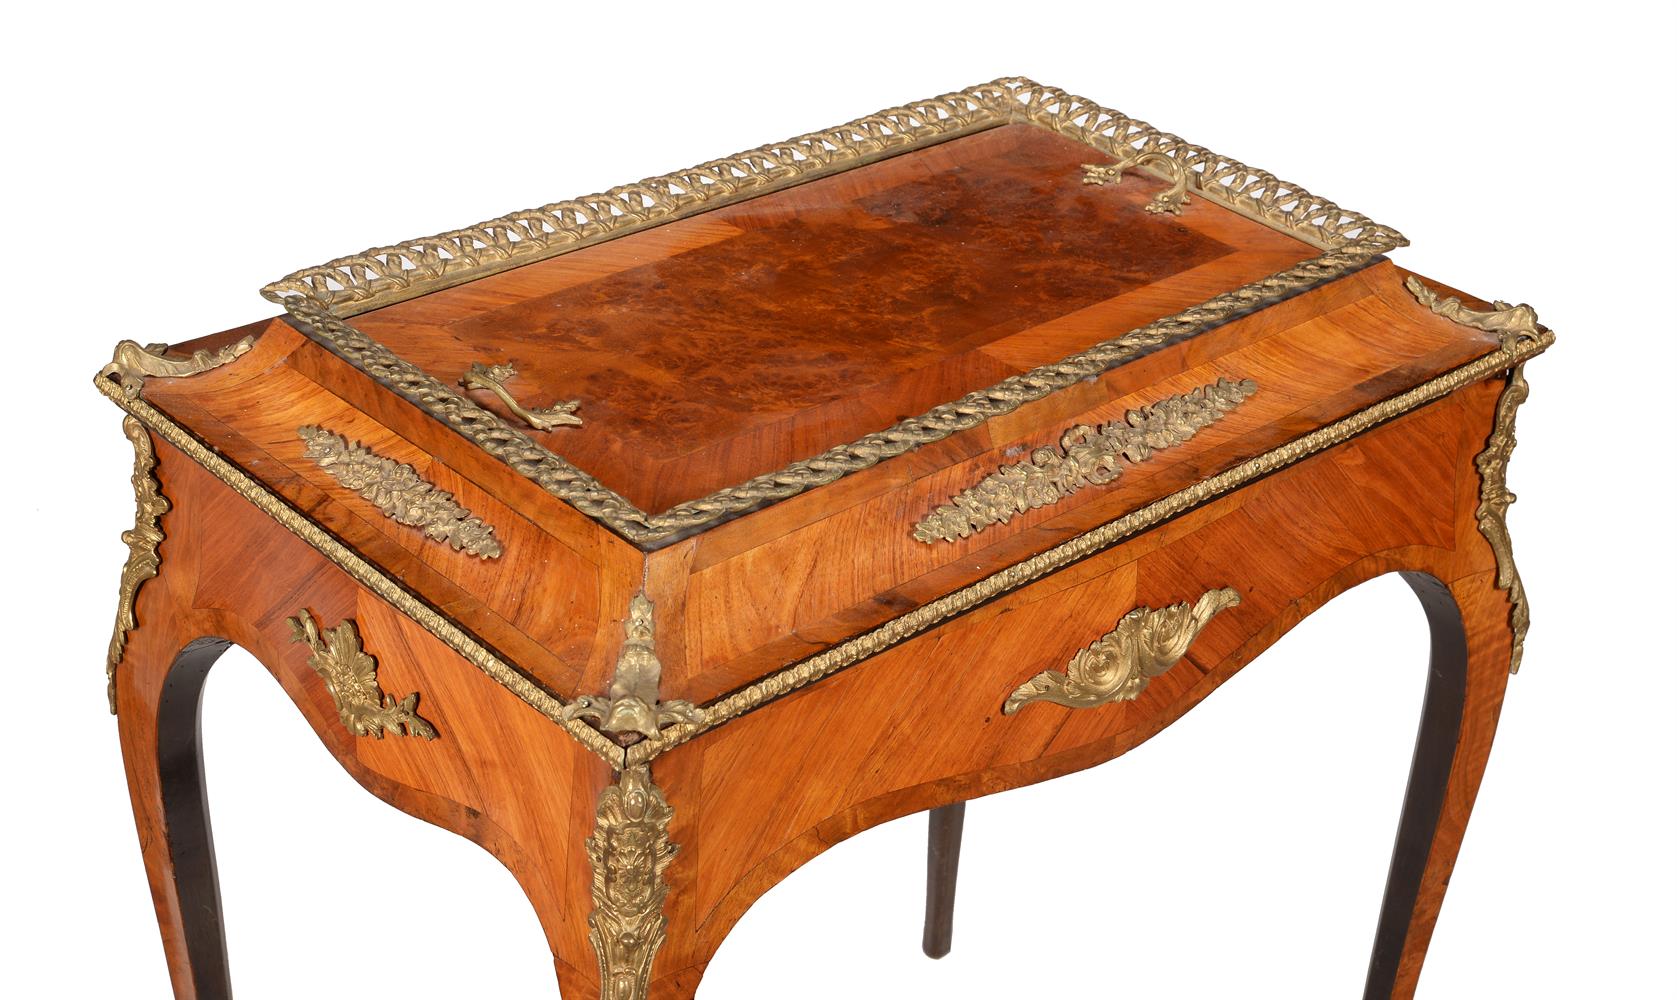 A FRENCH PARQUETRY AND GILT METAL MOUNTED JARDINIERE TABLE - Image 2 of 3